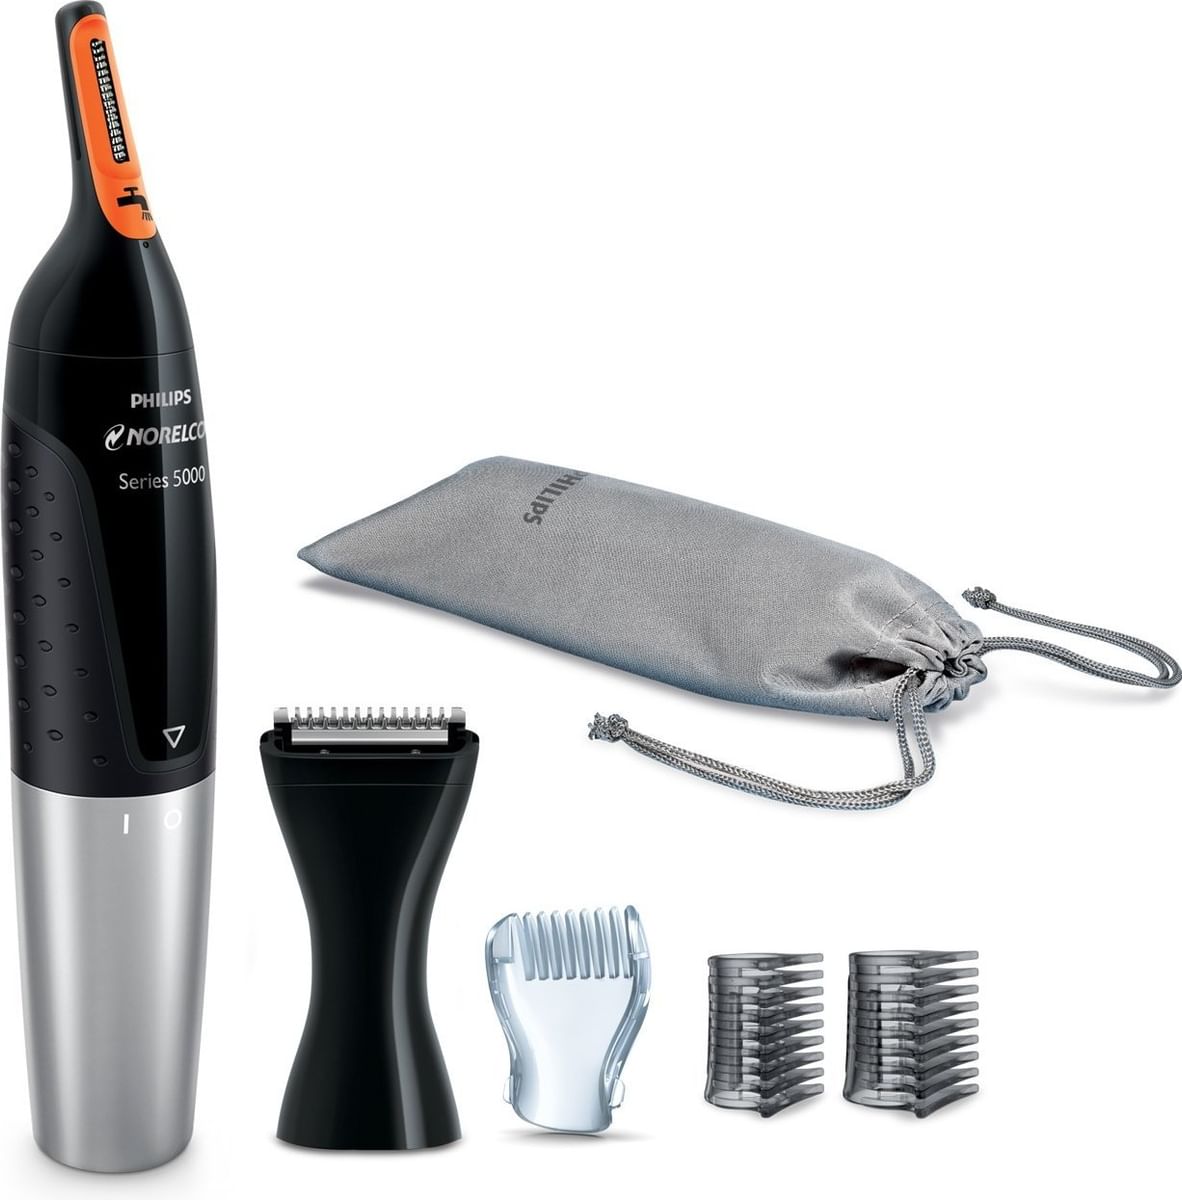 philips nose trimmer 3000 review